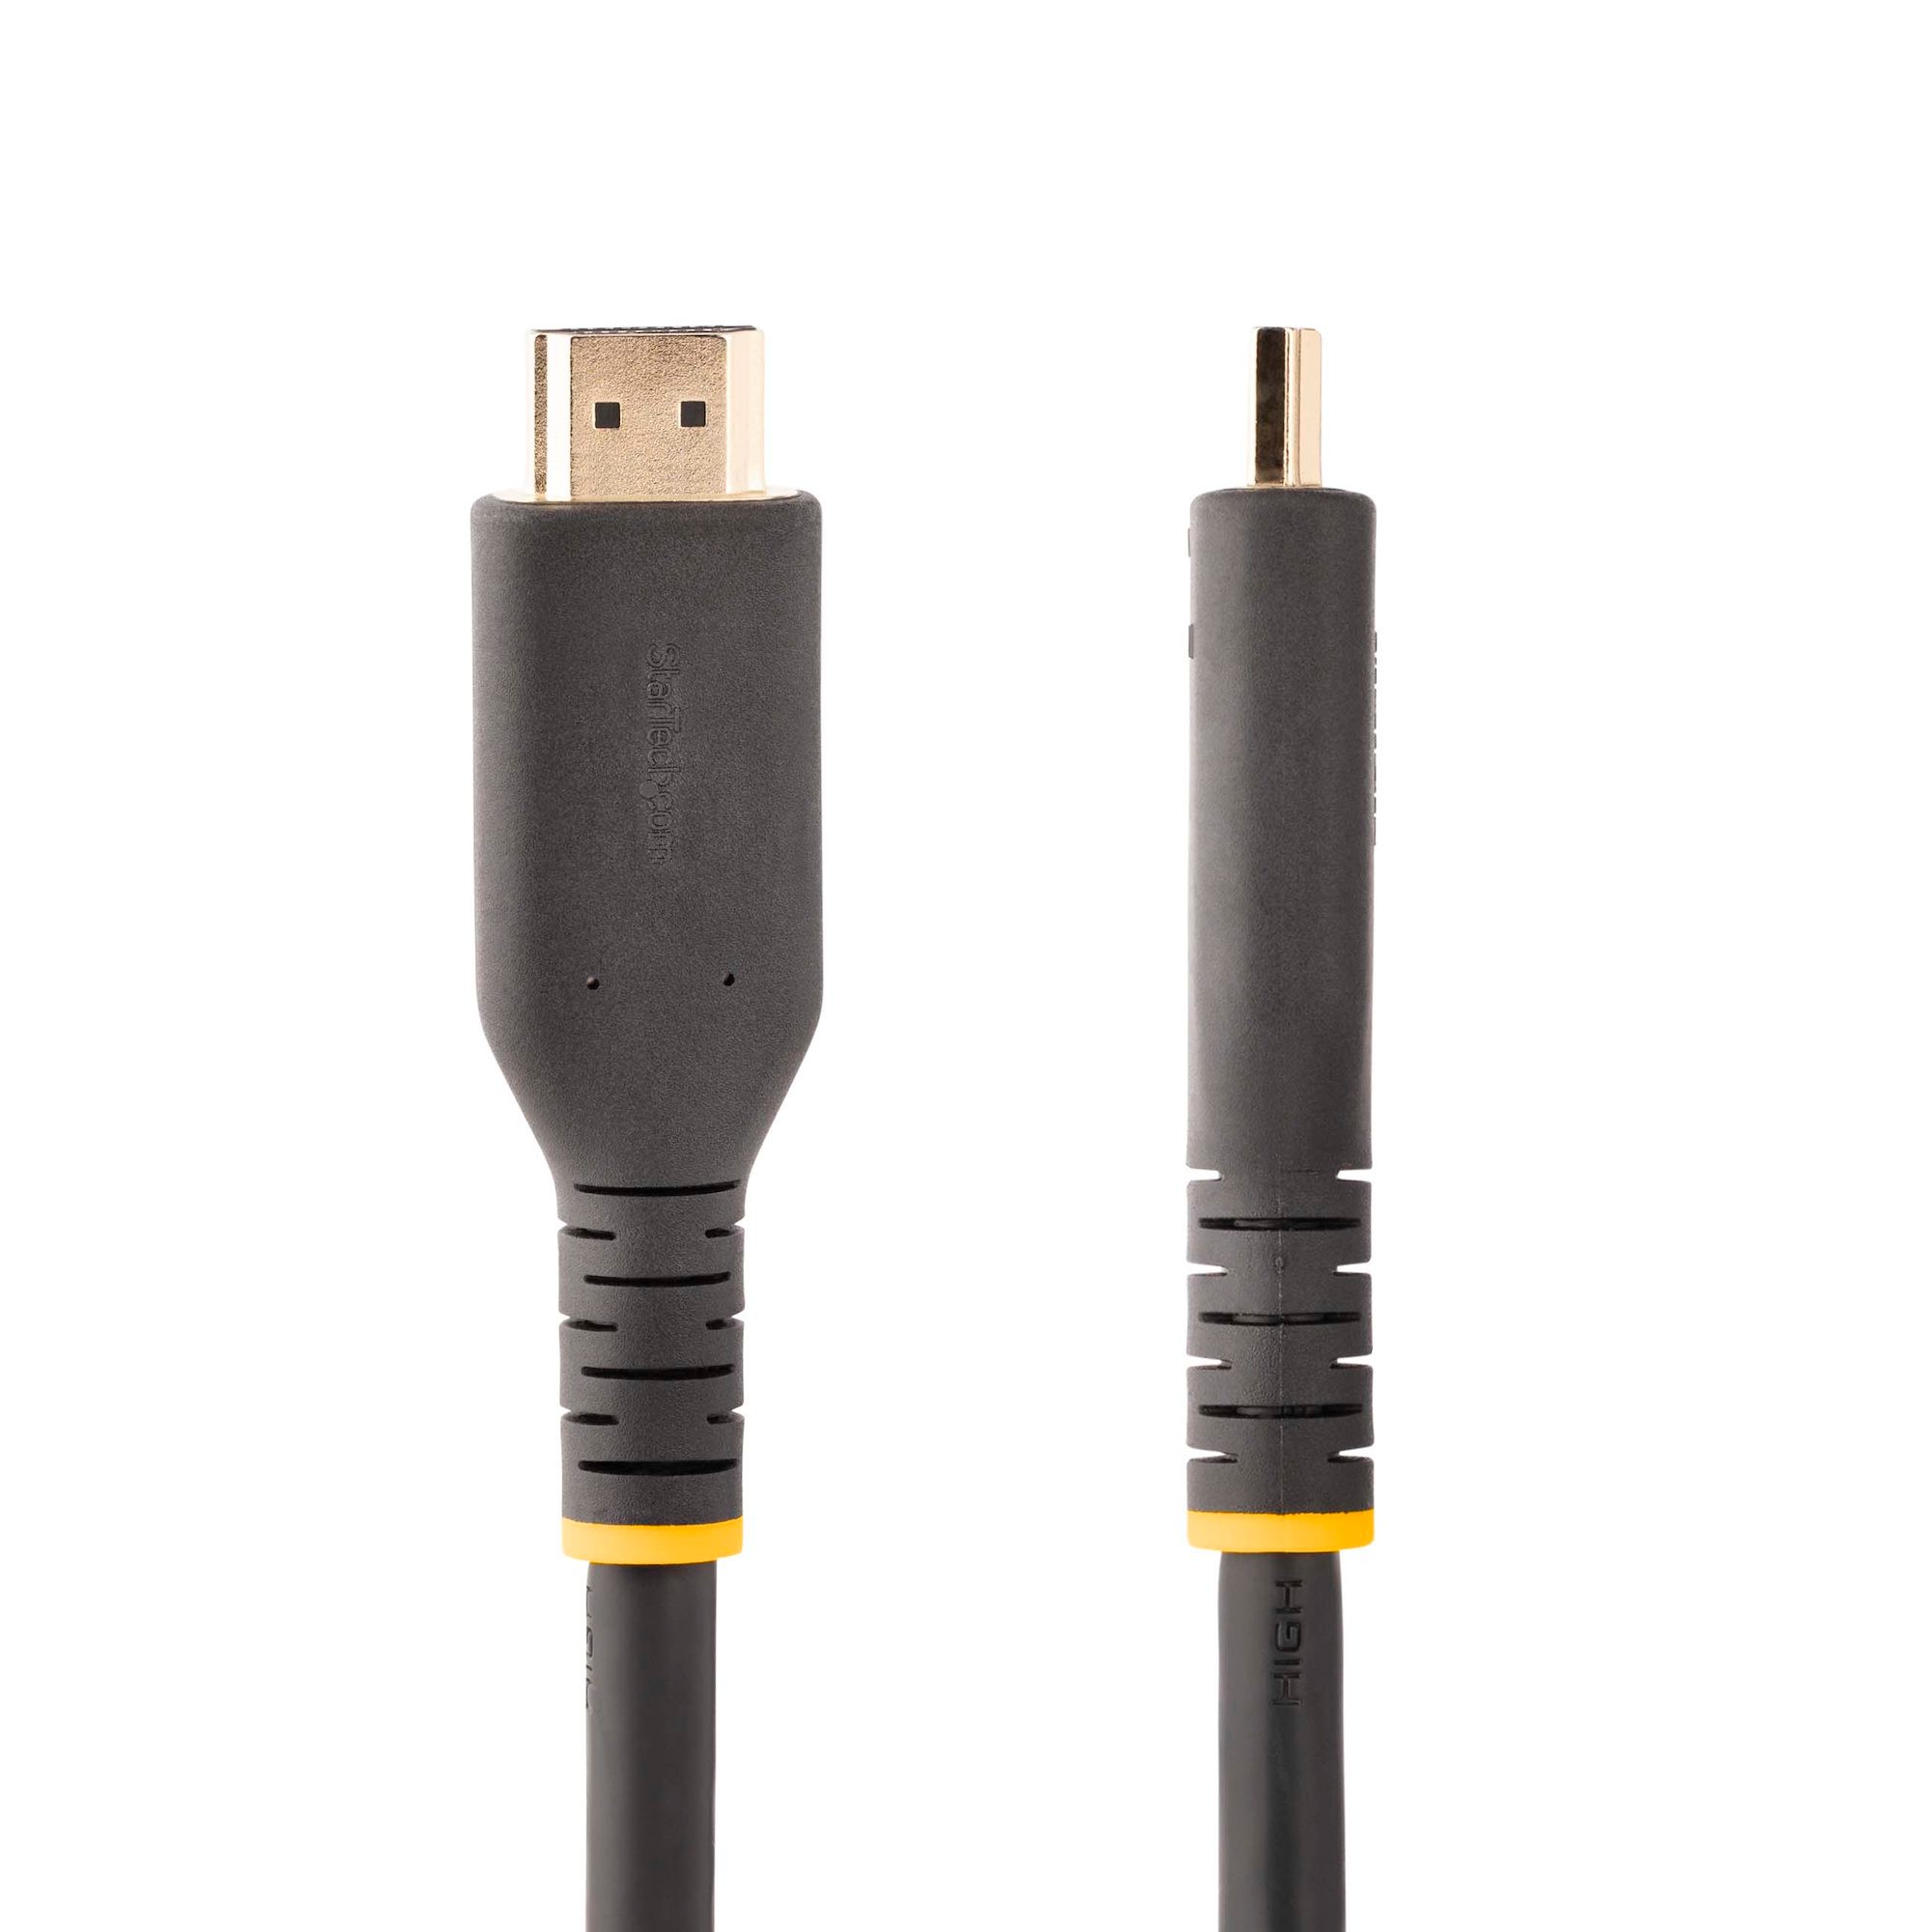 ENOVA, 7m HDMI Cable 2.0 4K, High Speed with Ethernet